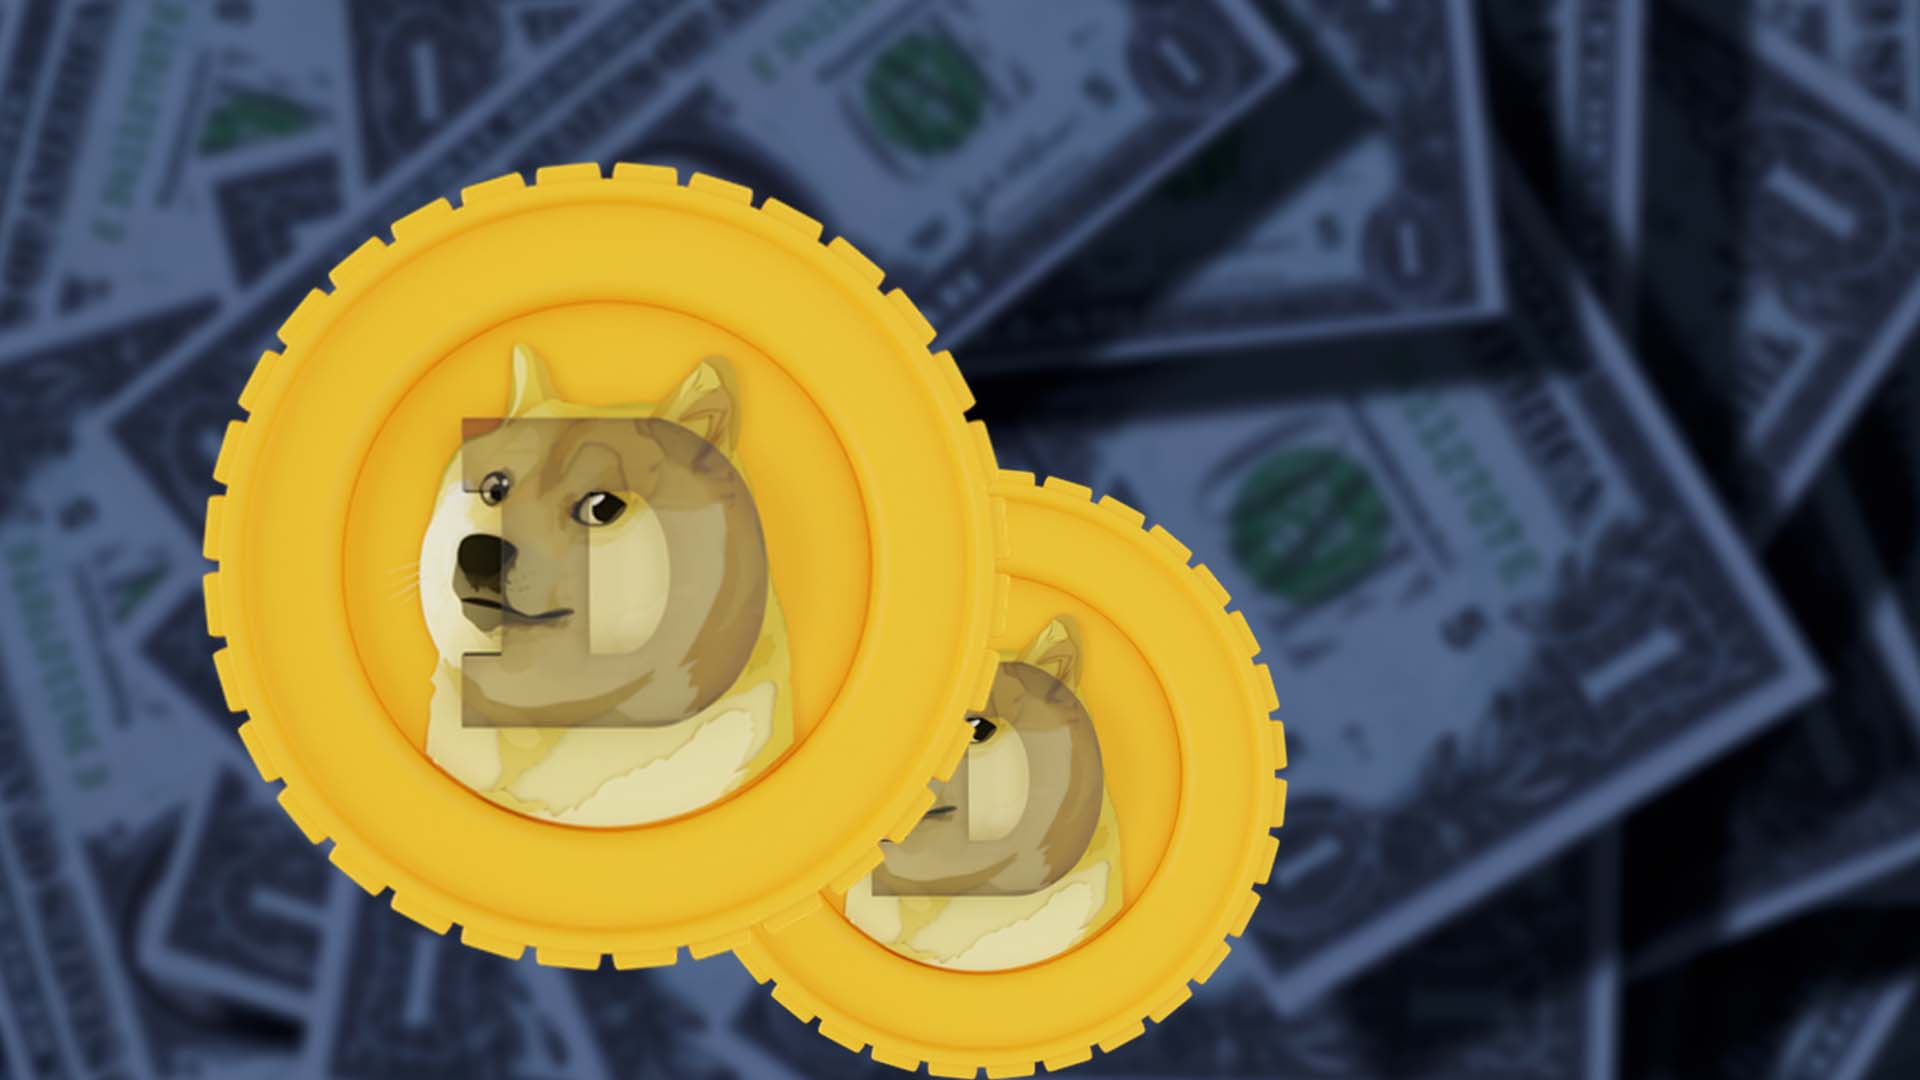 Nearly 360 Dogecoin millionaires wiped out in 6 months